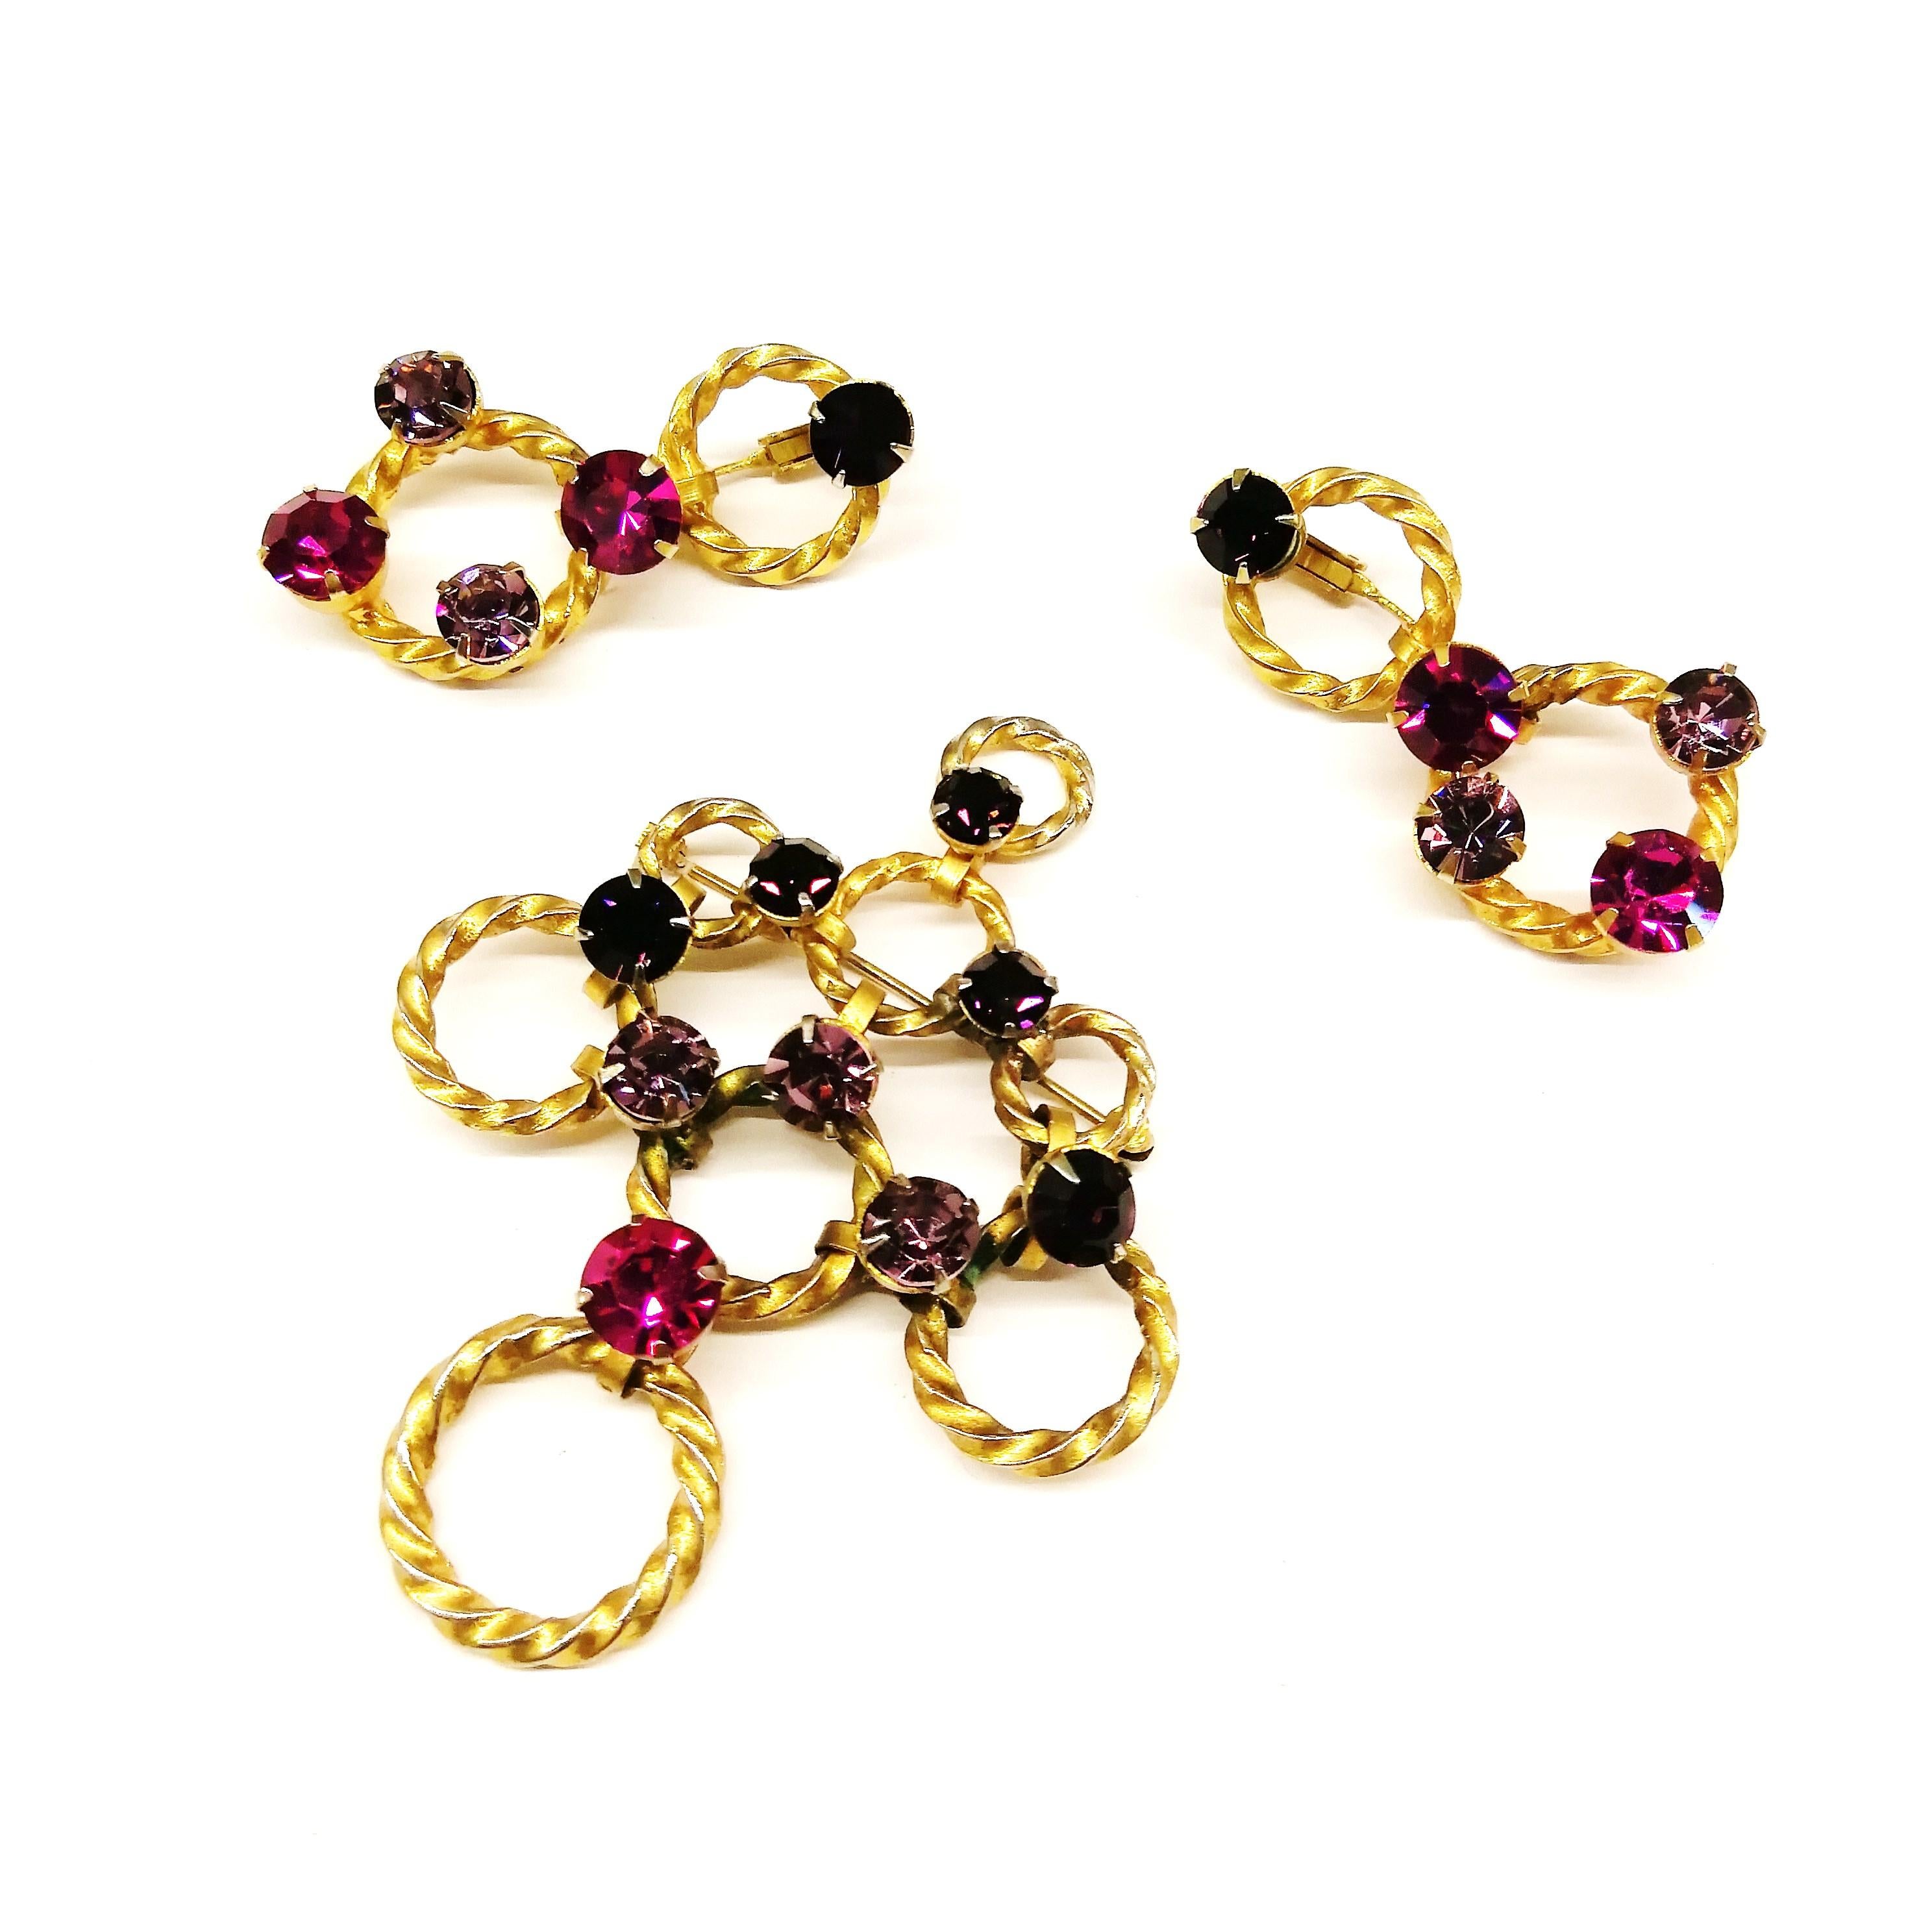 An unusual brooch and earrings from Christian Dior by Mitchel Maer, made of articulated twisted gilt rings of various sizes, highlighted with amethyst, light amethyst and fuschia pastes, both earrings and brooches are articulated. A structured